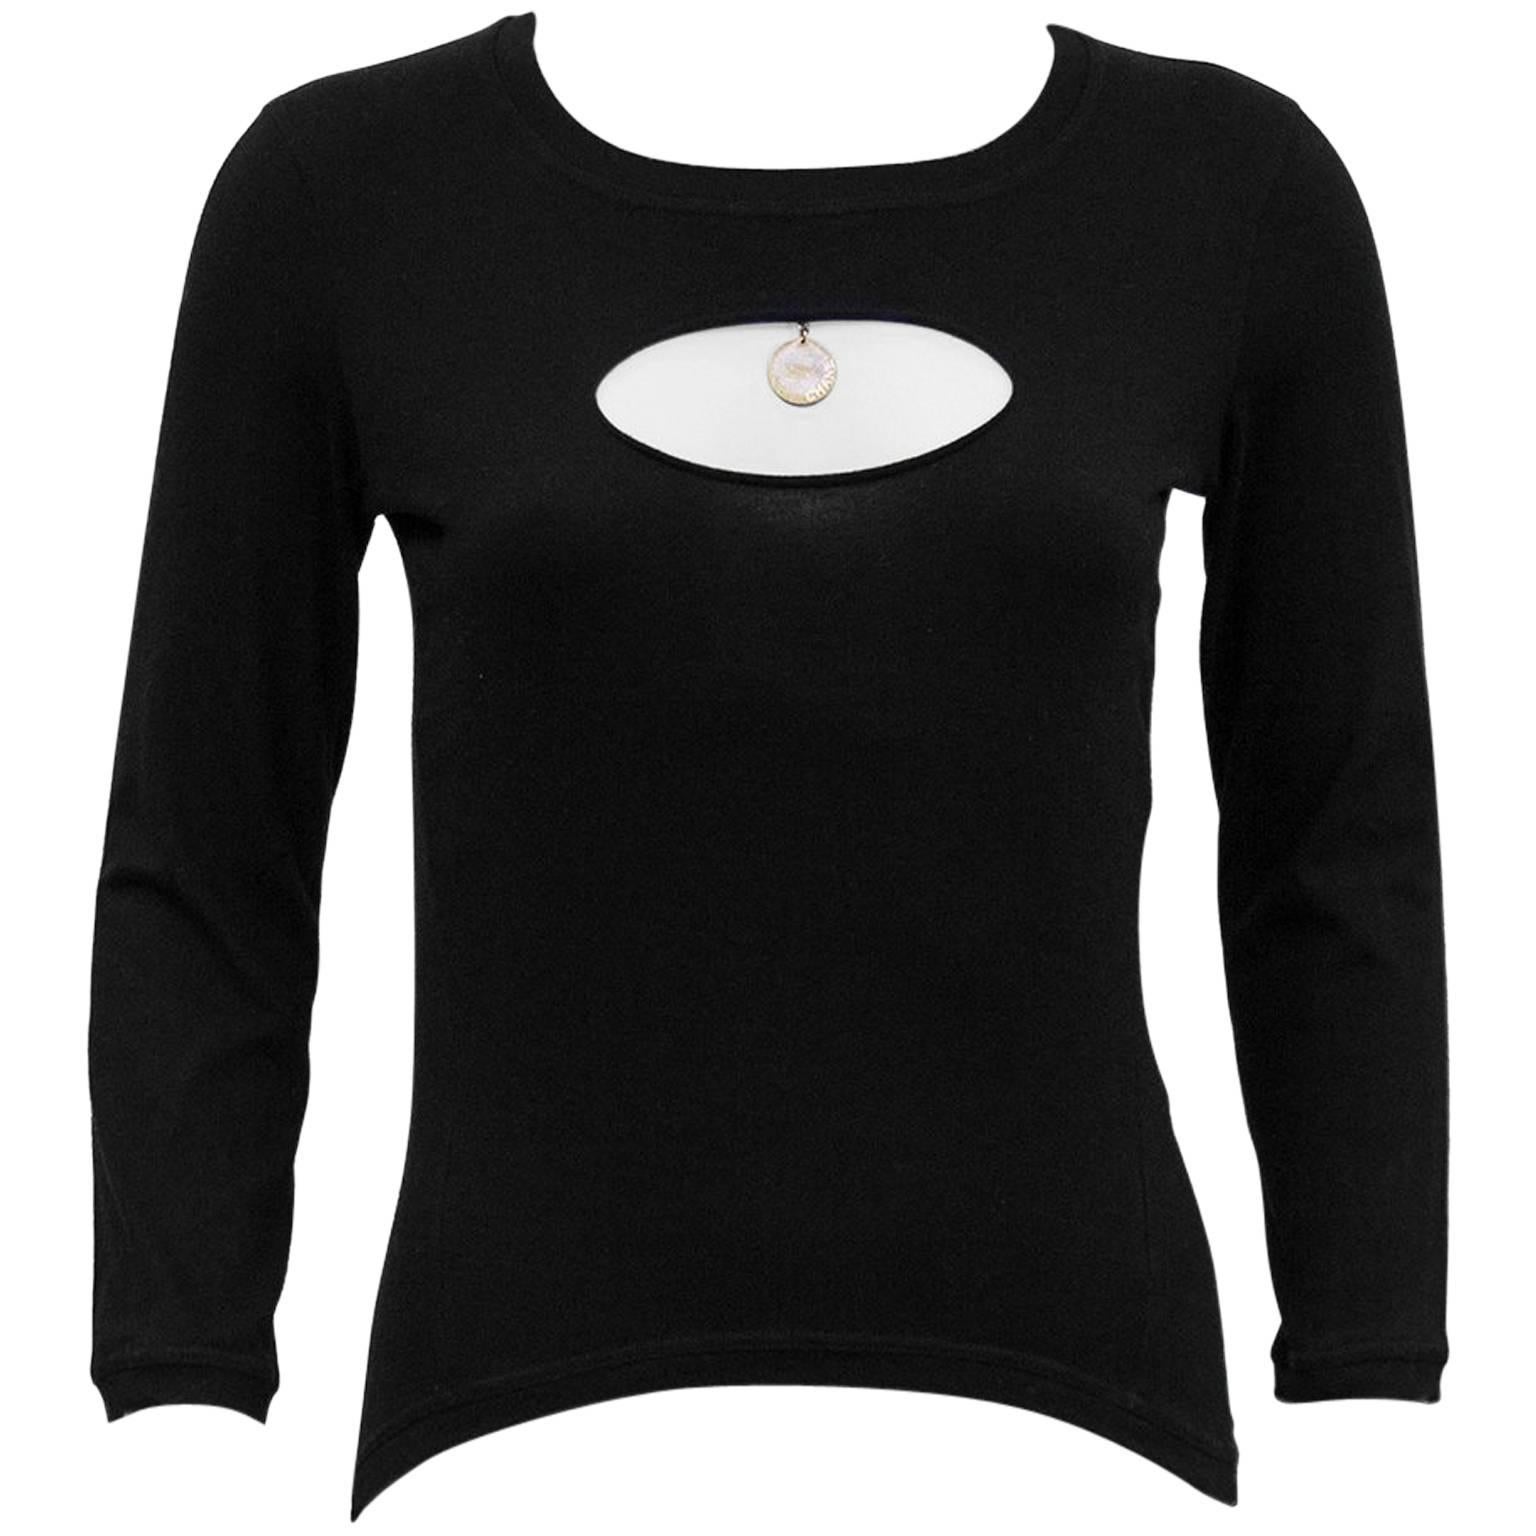 Chanel Black Long Sleeve Top with Cut Out and Coin Detail, 1990s  For Sale